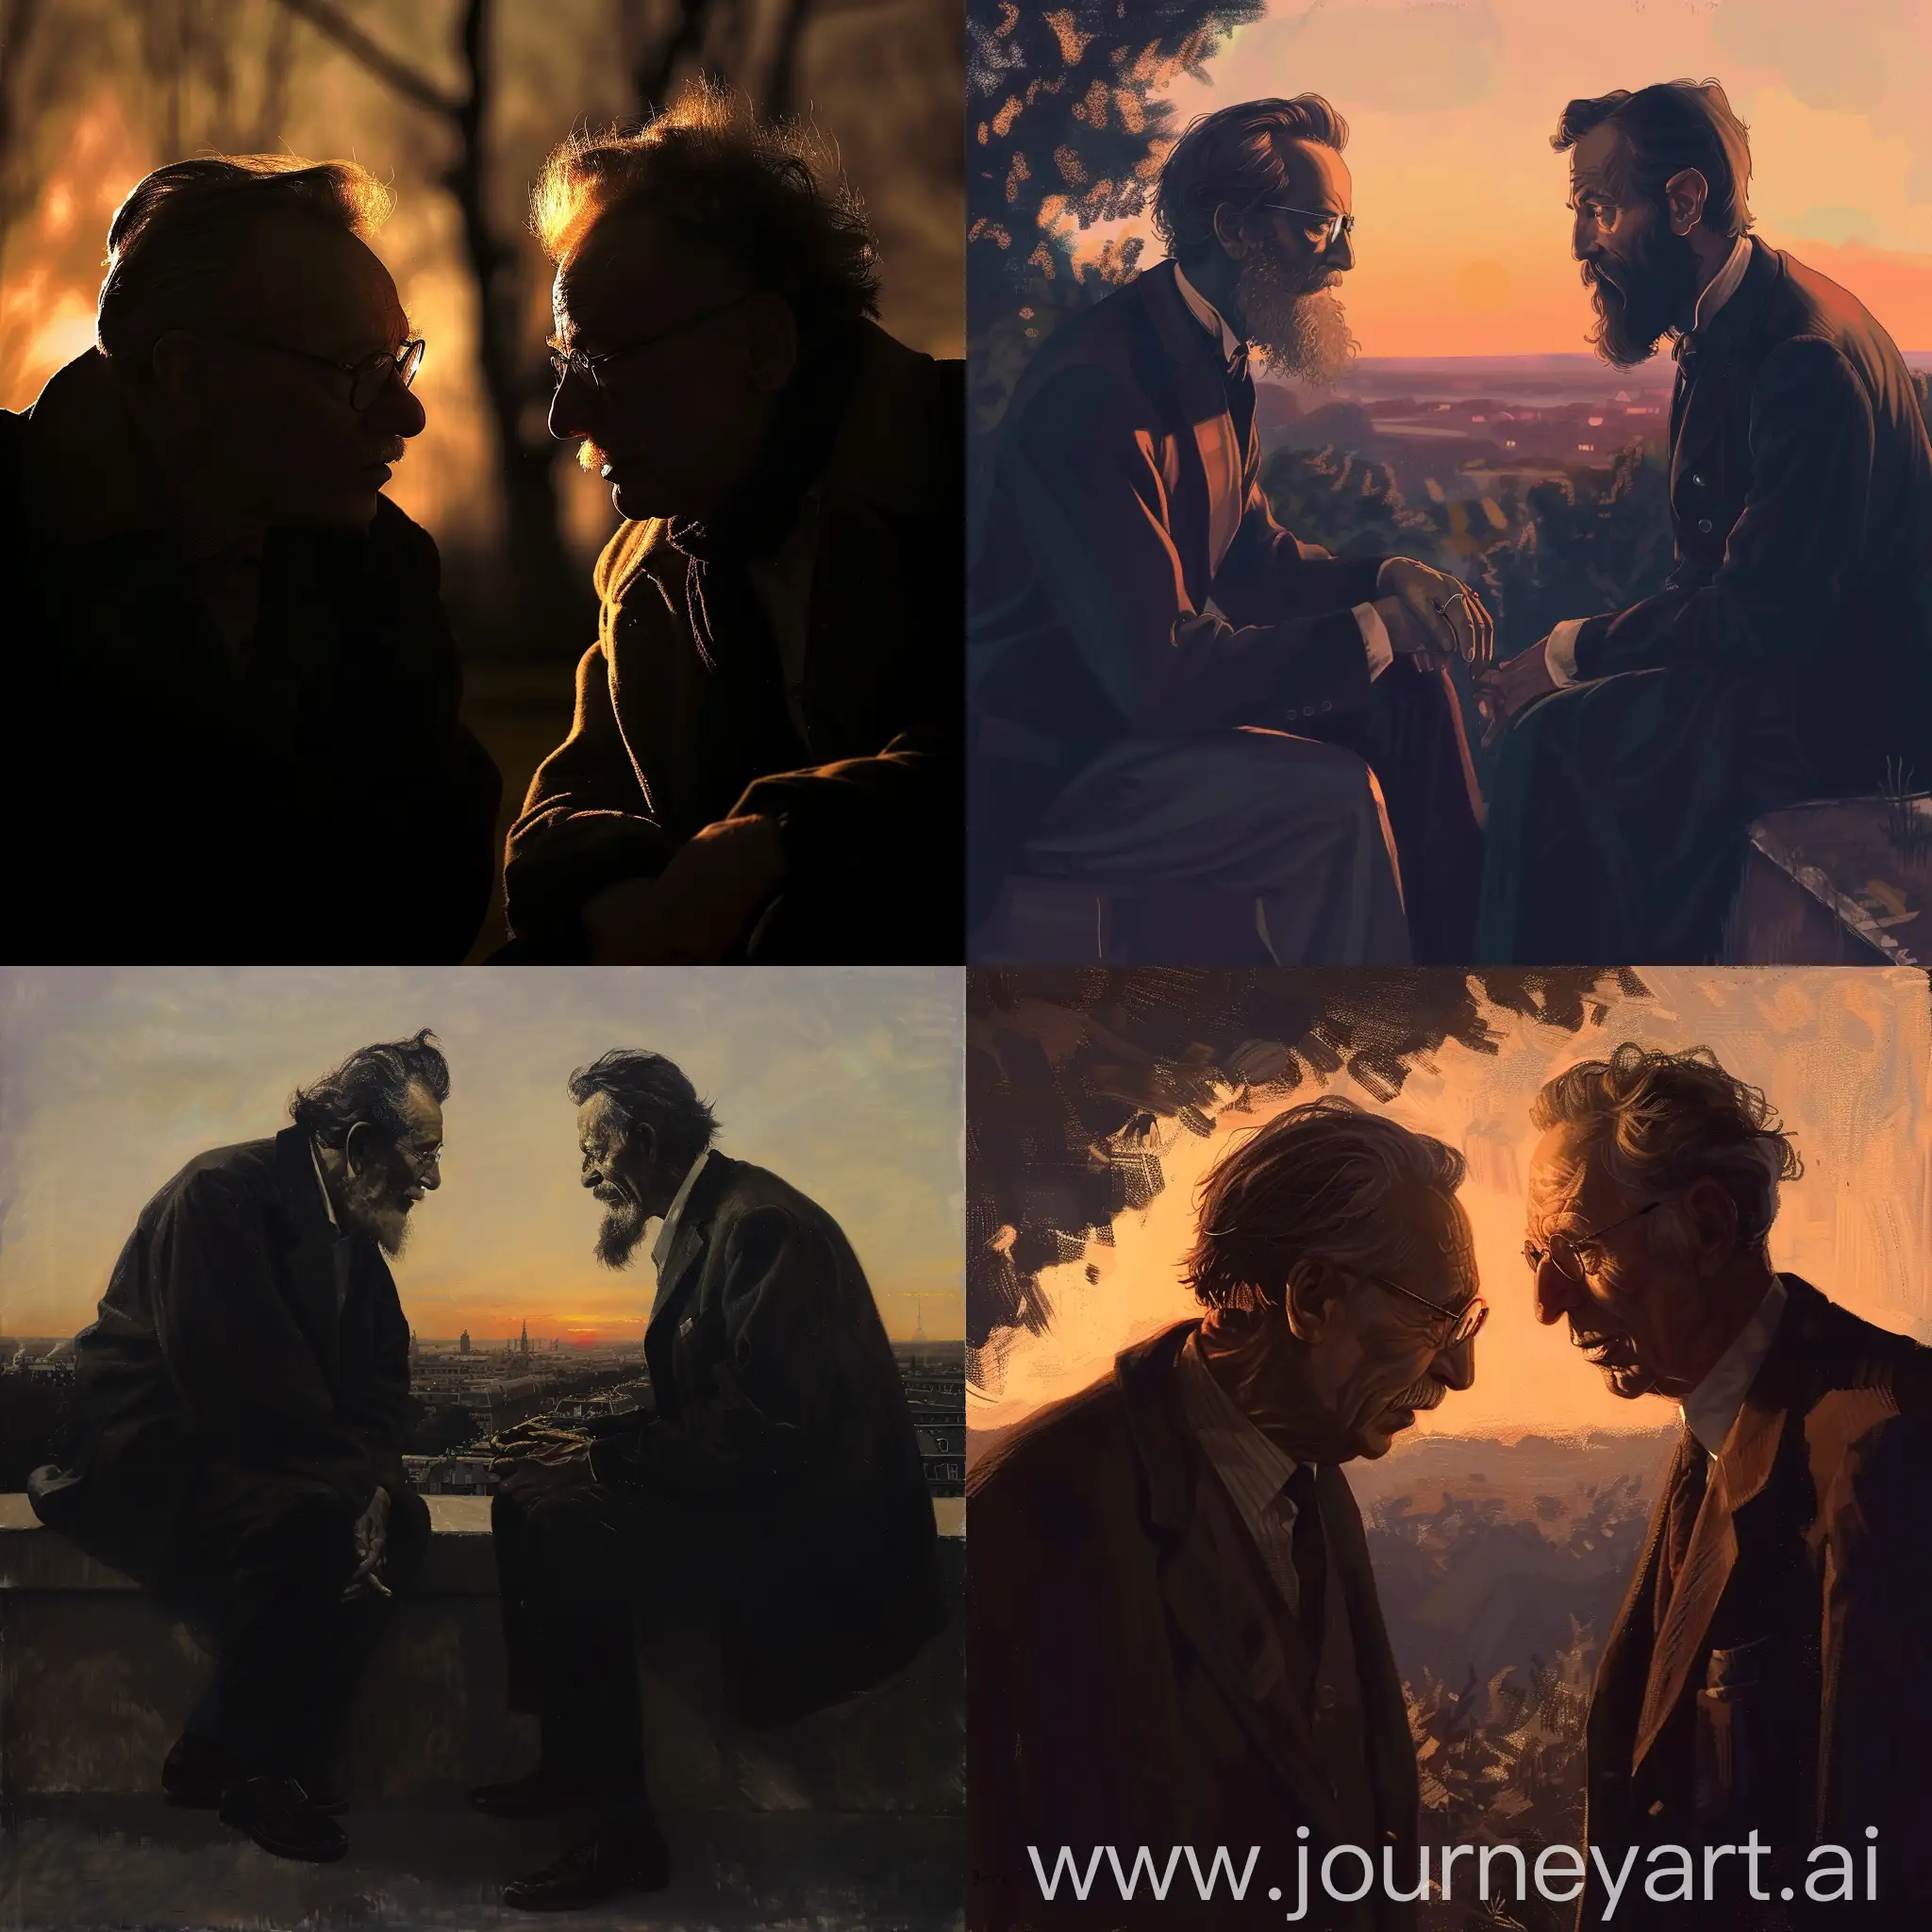 Philosophical giants, Jean-Paul Sartre and Friedrich Nietzsche, engaged in a deep conversation at dusk, under the soft, illuminating glow of the setting sun.